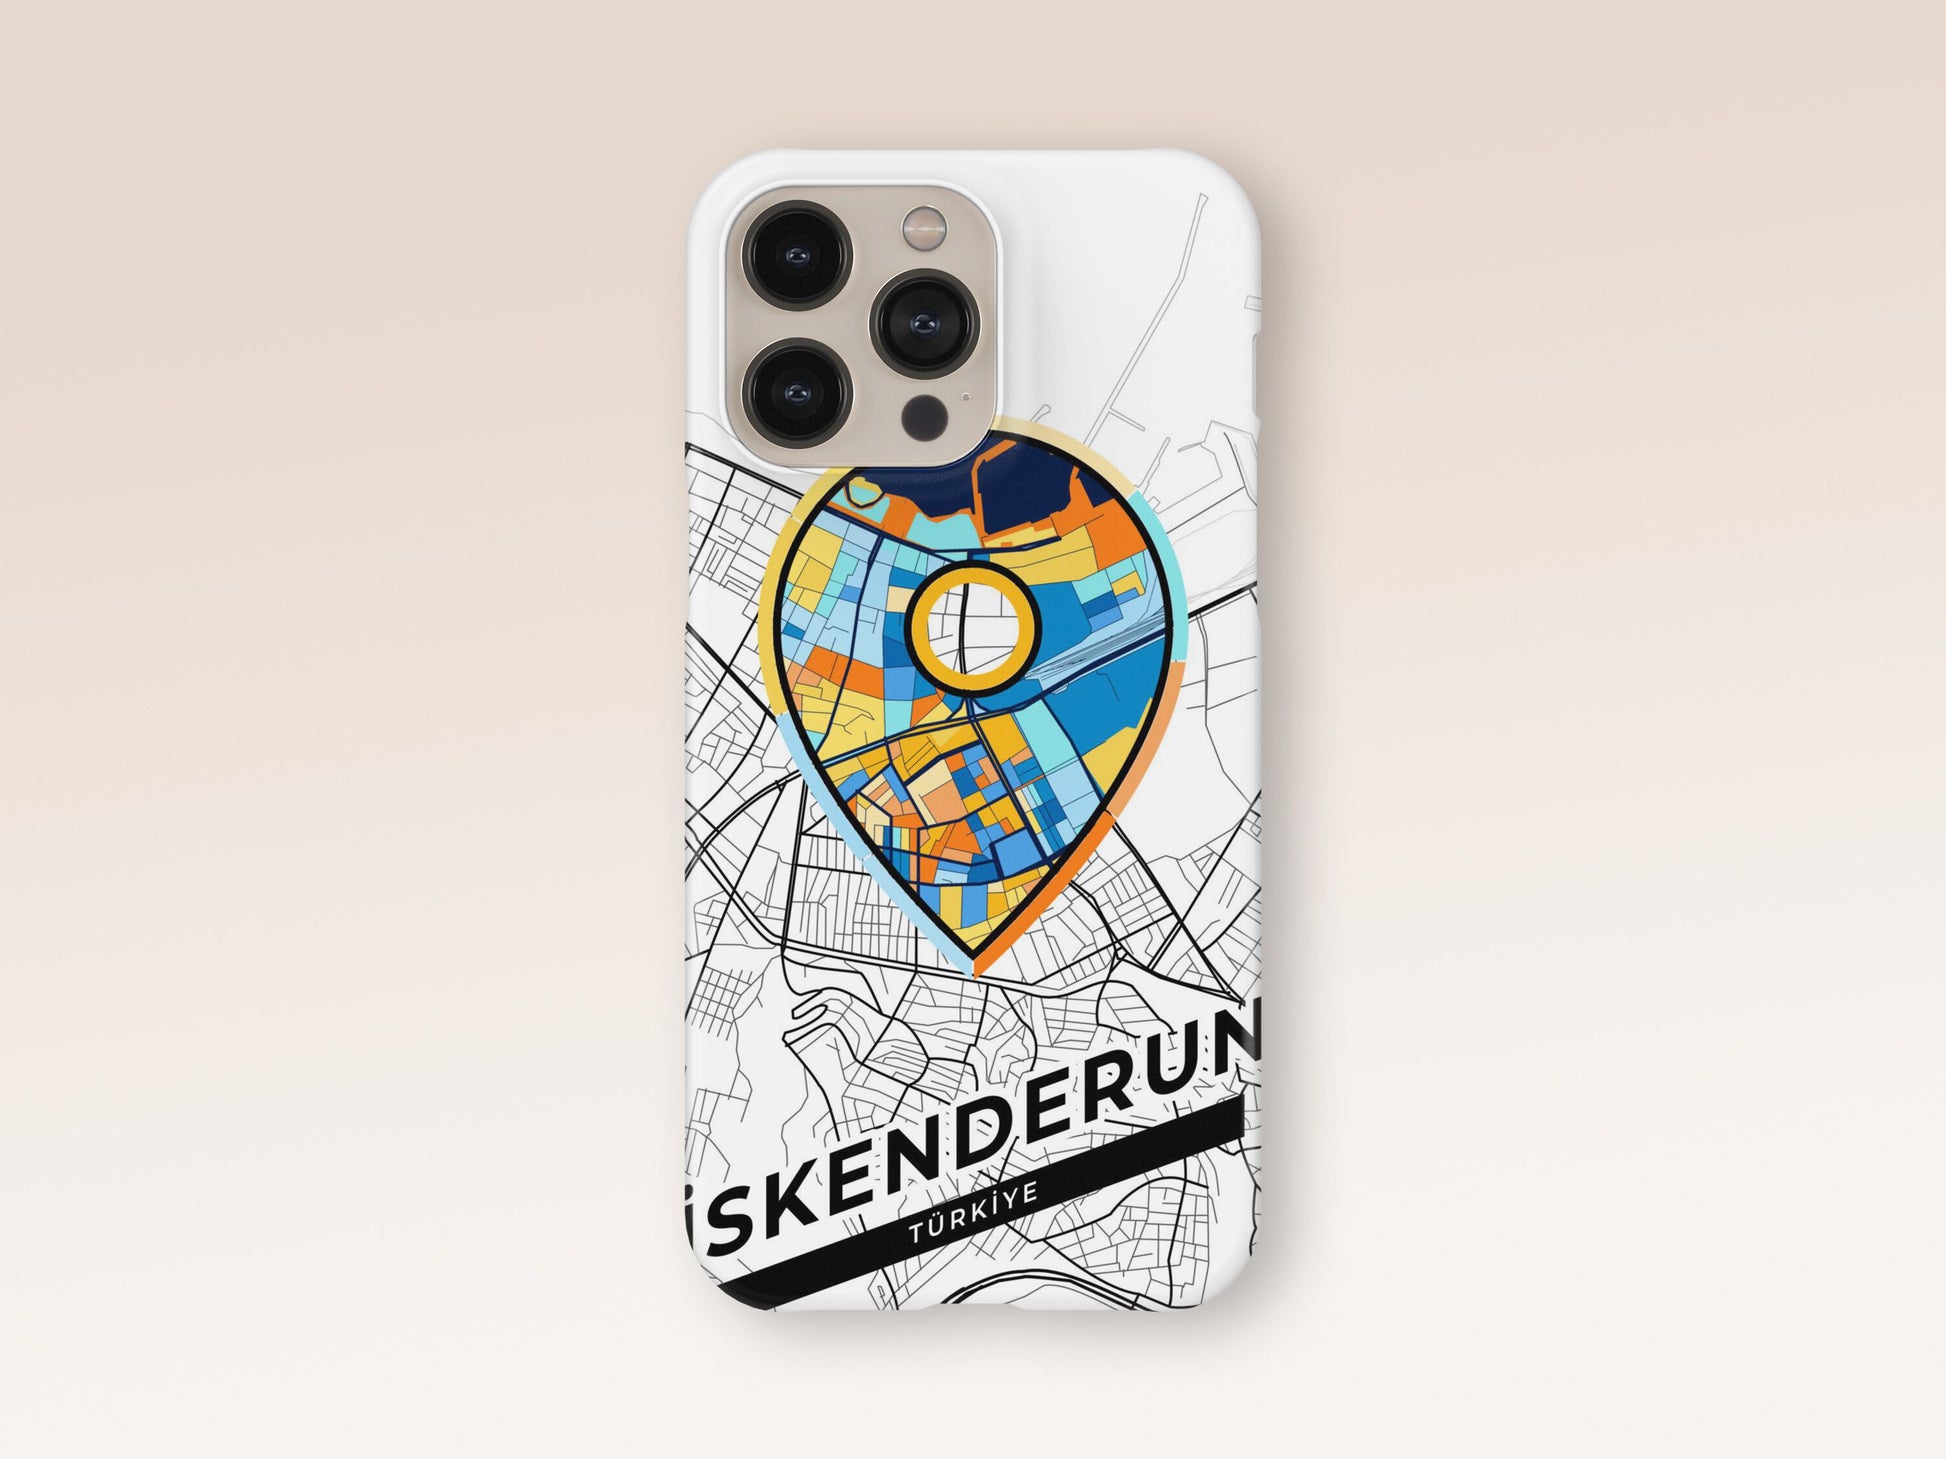 İskenderun Turkey slim phone case with colorful icon. Birthday, wedding or housewarming gift. Couple match cases. 1